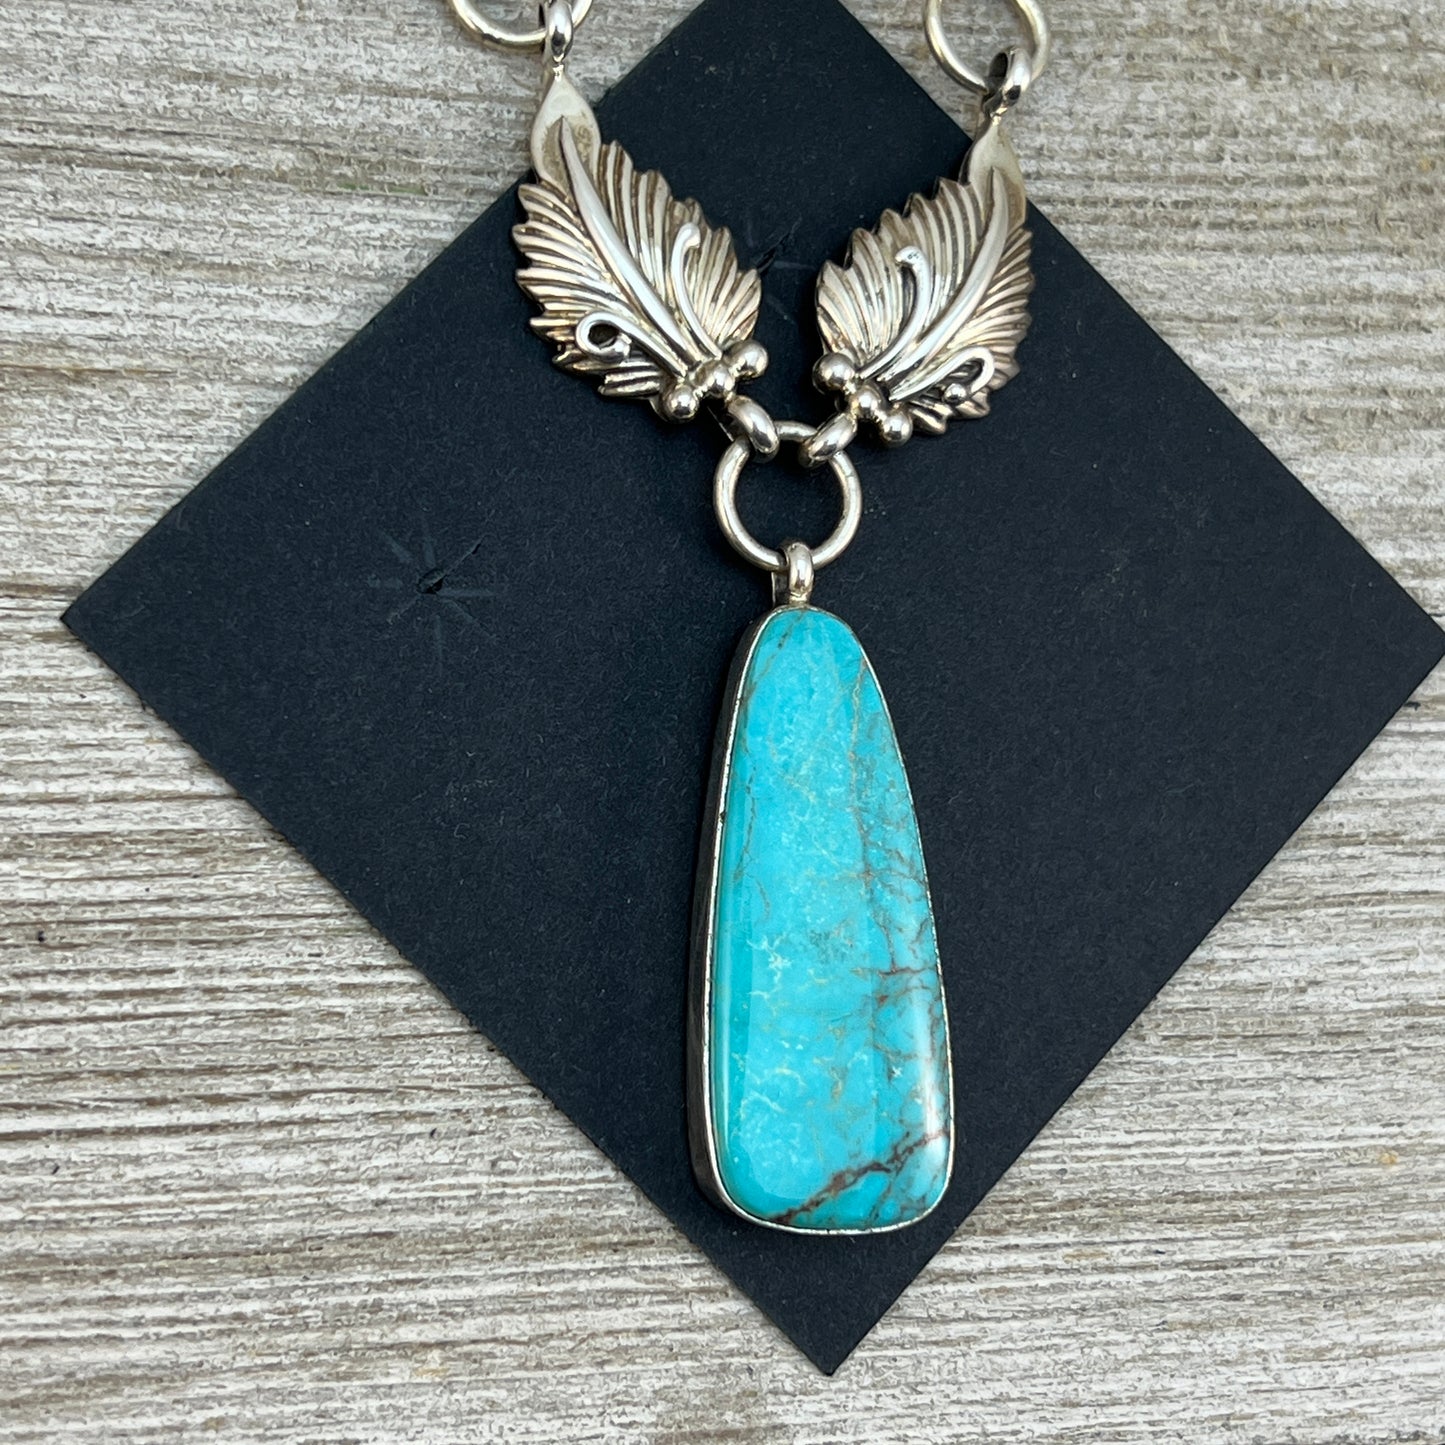 Kingman Turquoise 18" Necklace #1 with Drop Pendant, Real Turquoise, Boho Choker, sterling silver